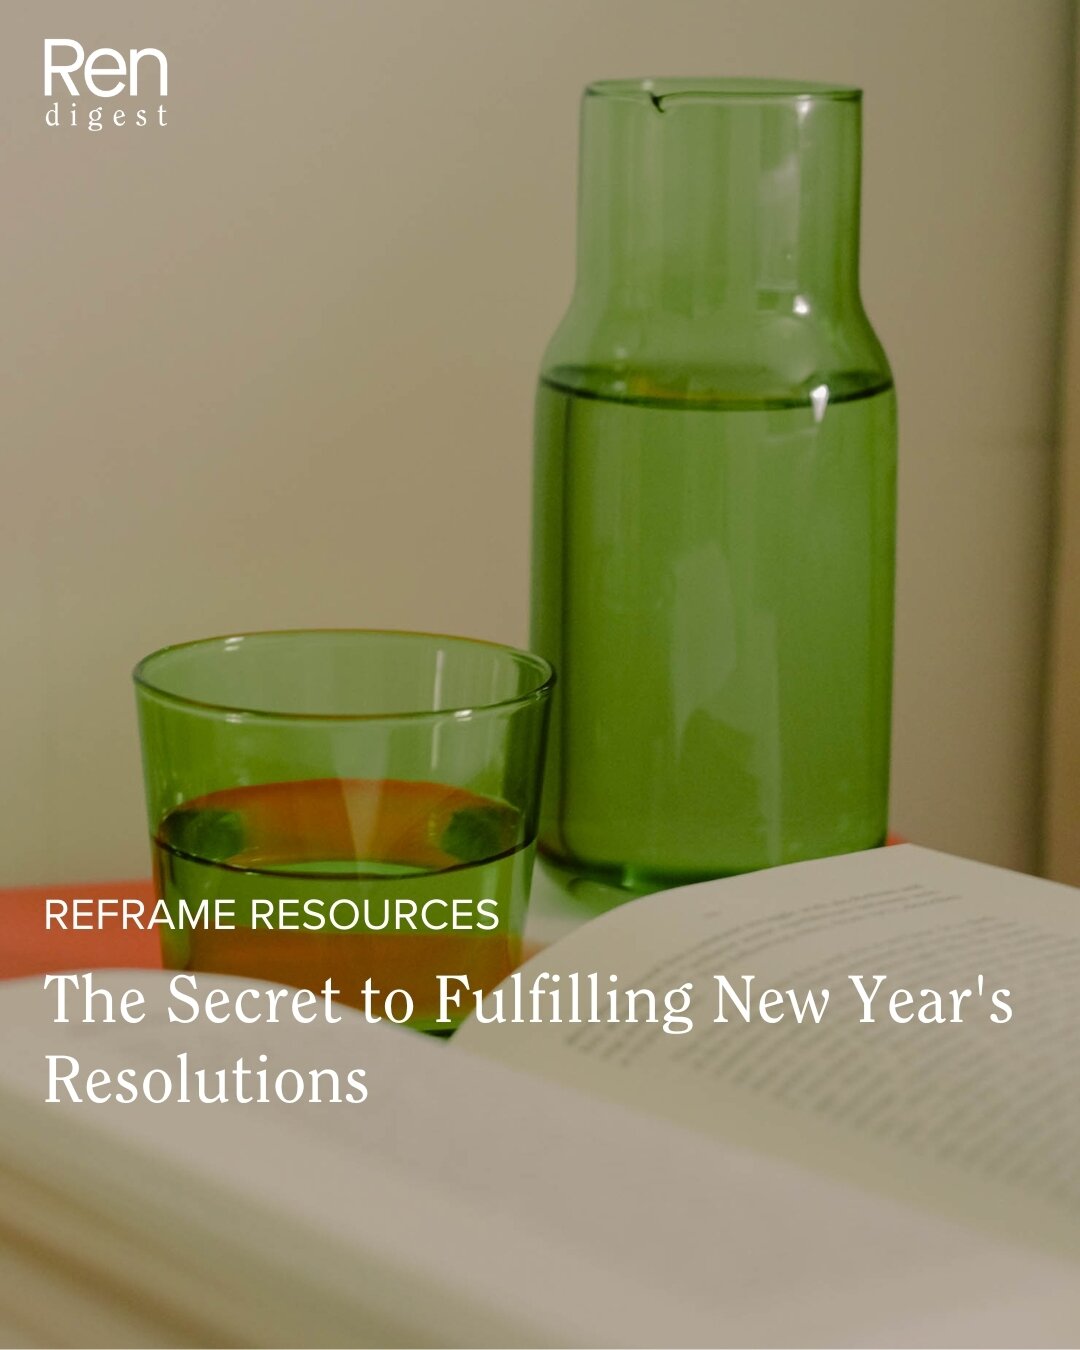 We&rsquo;re about two weeks into the month of February, and if the &lsquo;high&rsquo; of the new year has started to fade for you, you&rsquo;re not alone.

This week&rsquo;s Ren Digest article dives into the secret to fulfilling goals (not just setti